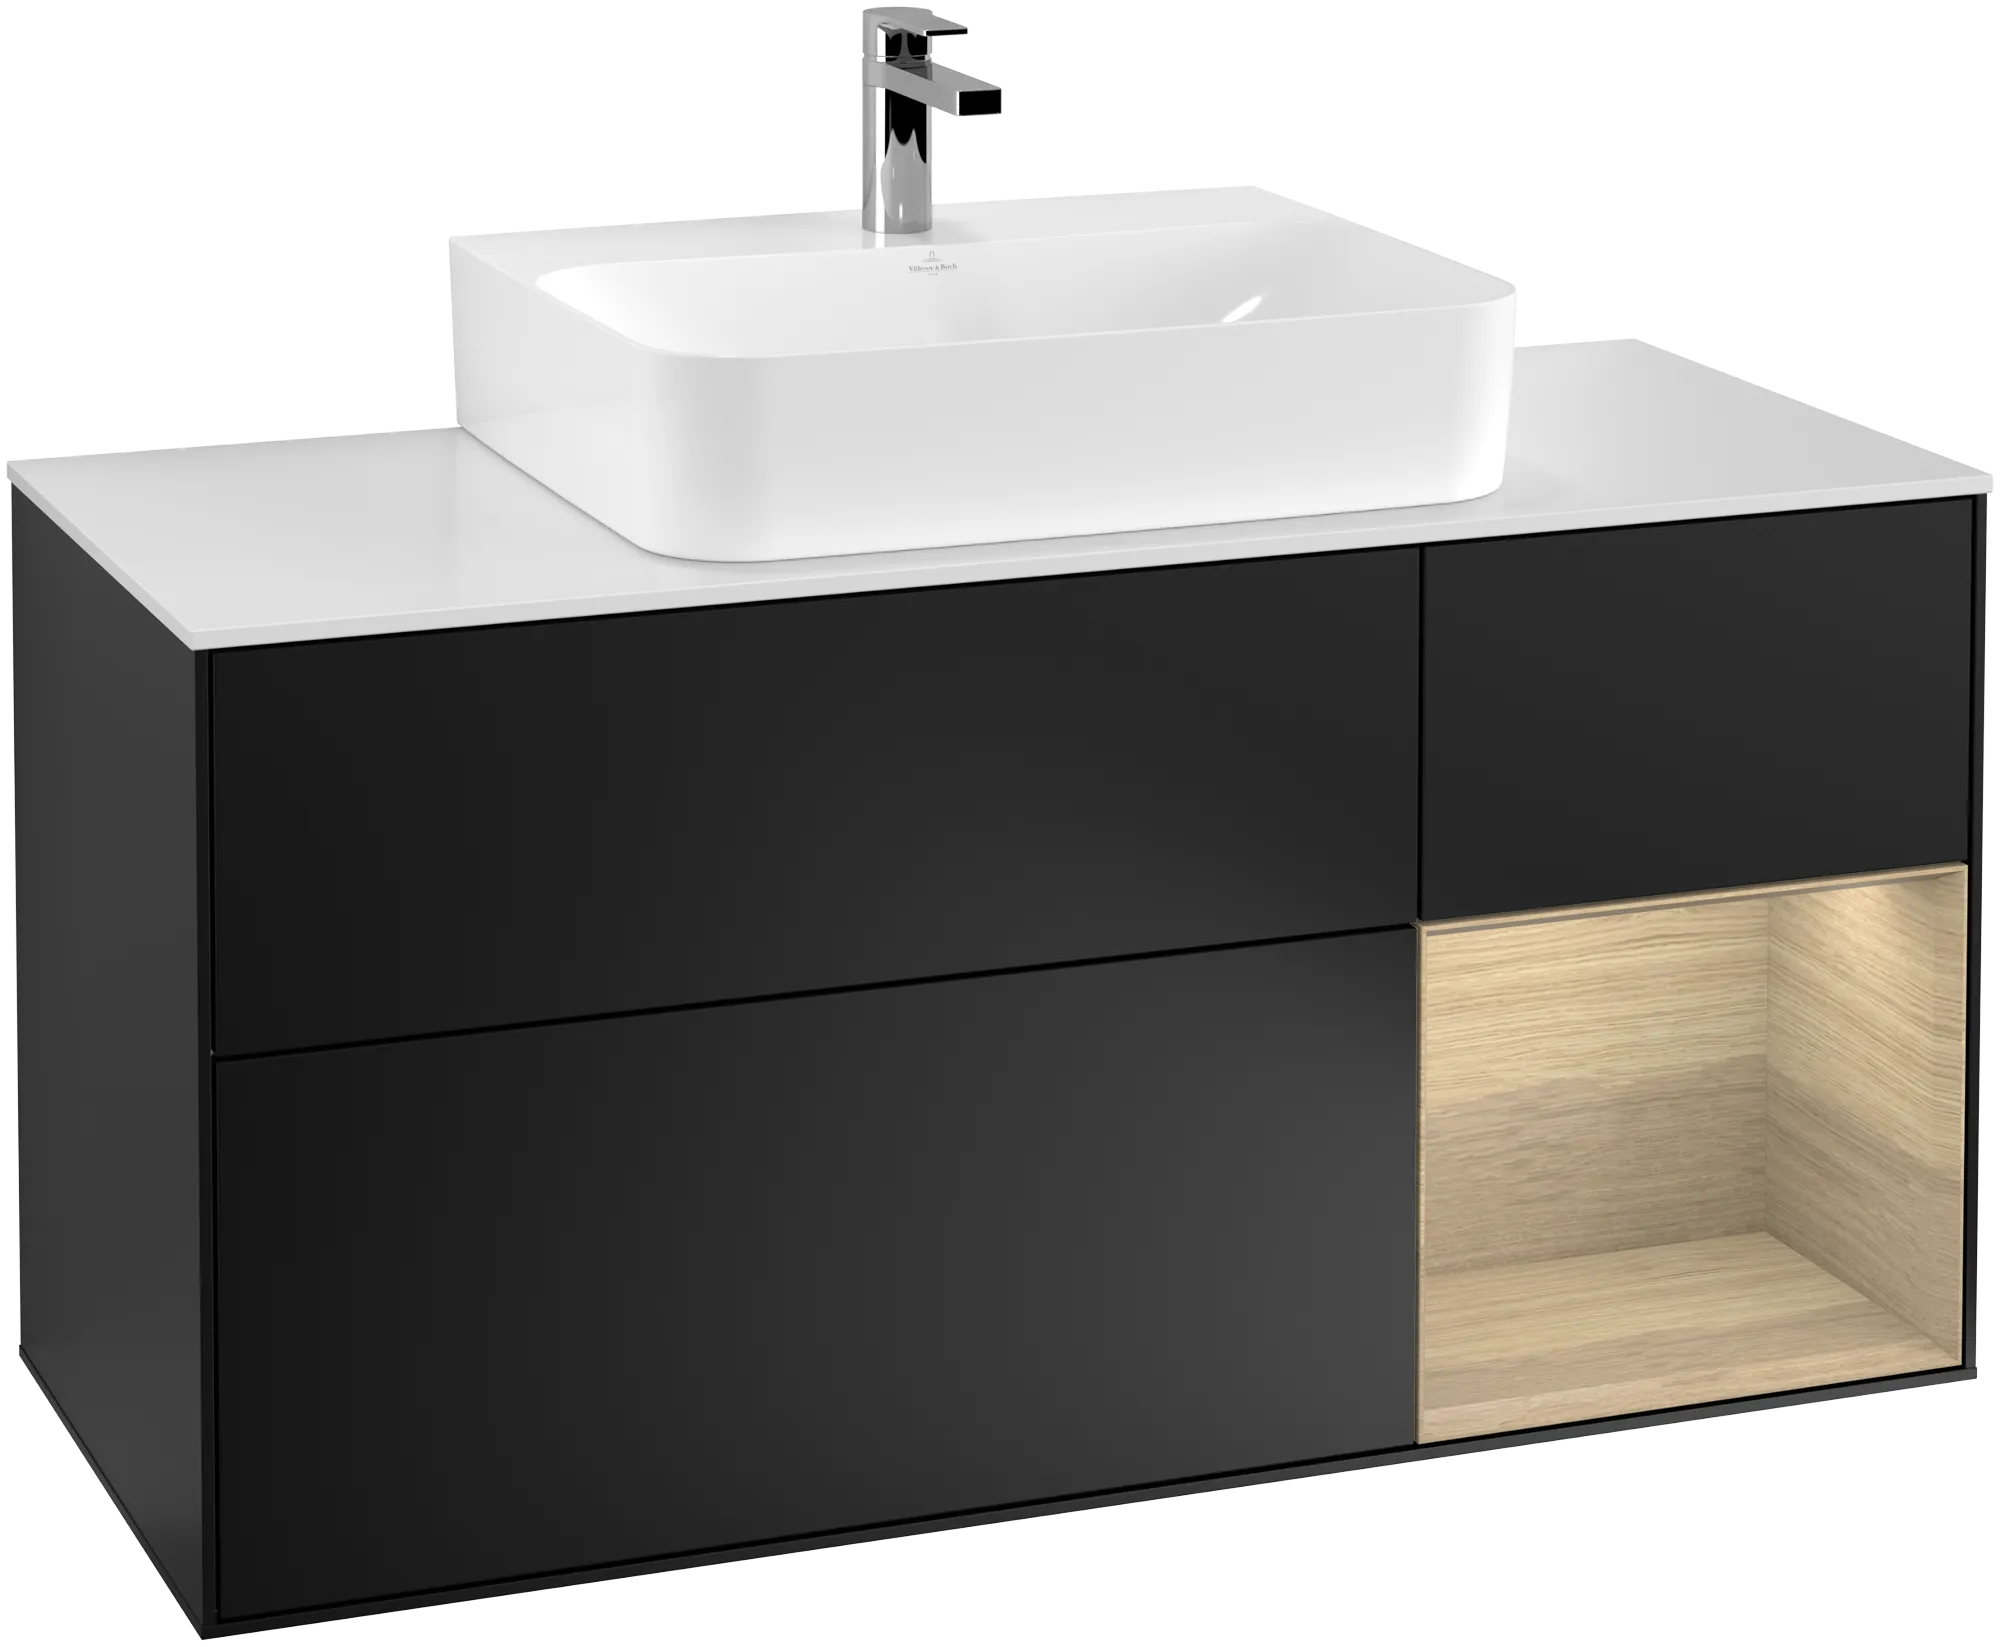 Picture of VILLEROY BOCH Finion Vanity unit, with lighting, 3 pull-out compartments, 1200 x 603 x 501 mm, Black Matt Lacquer / Oak Veneer / Glass White Matt #G171PCPD